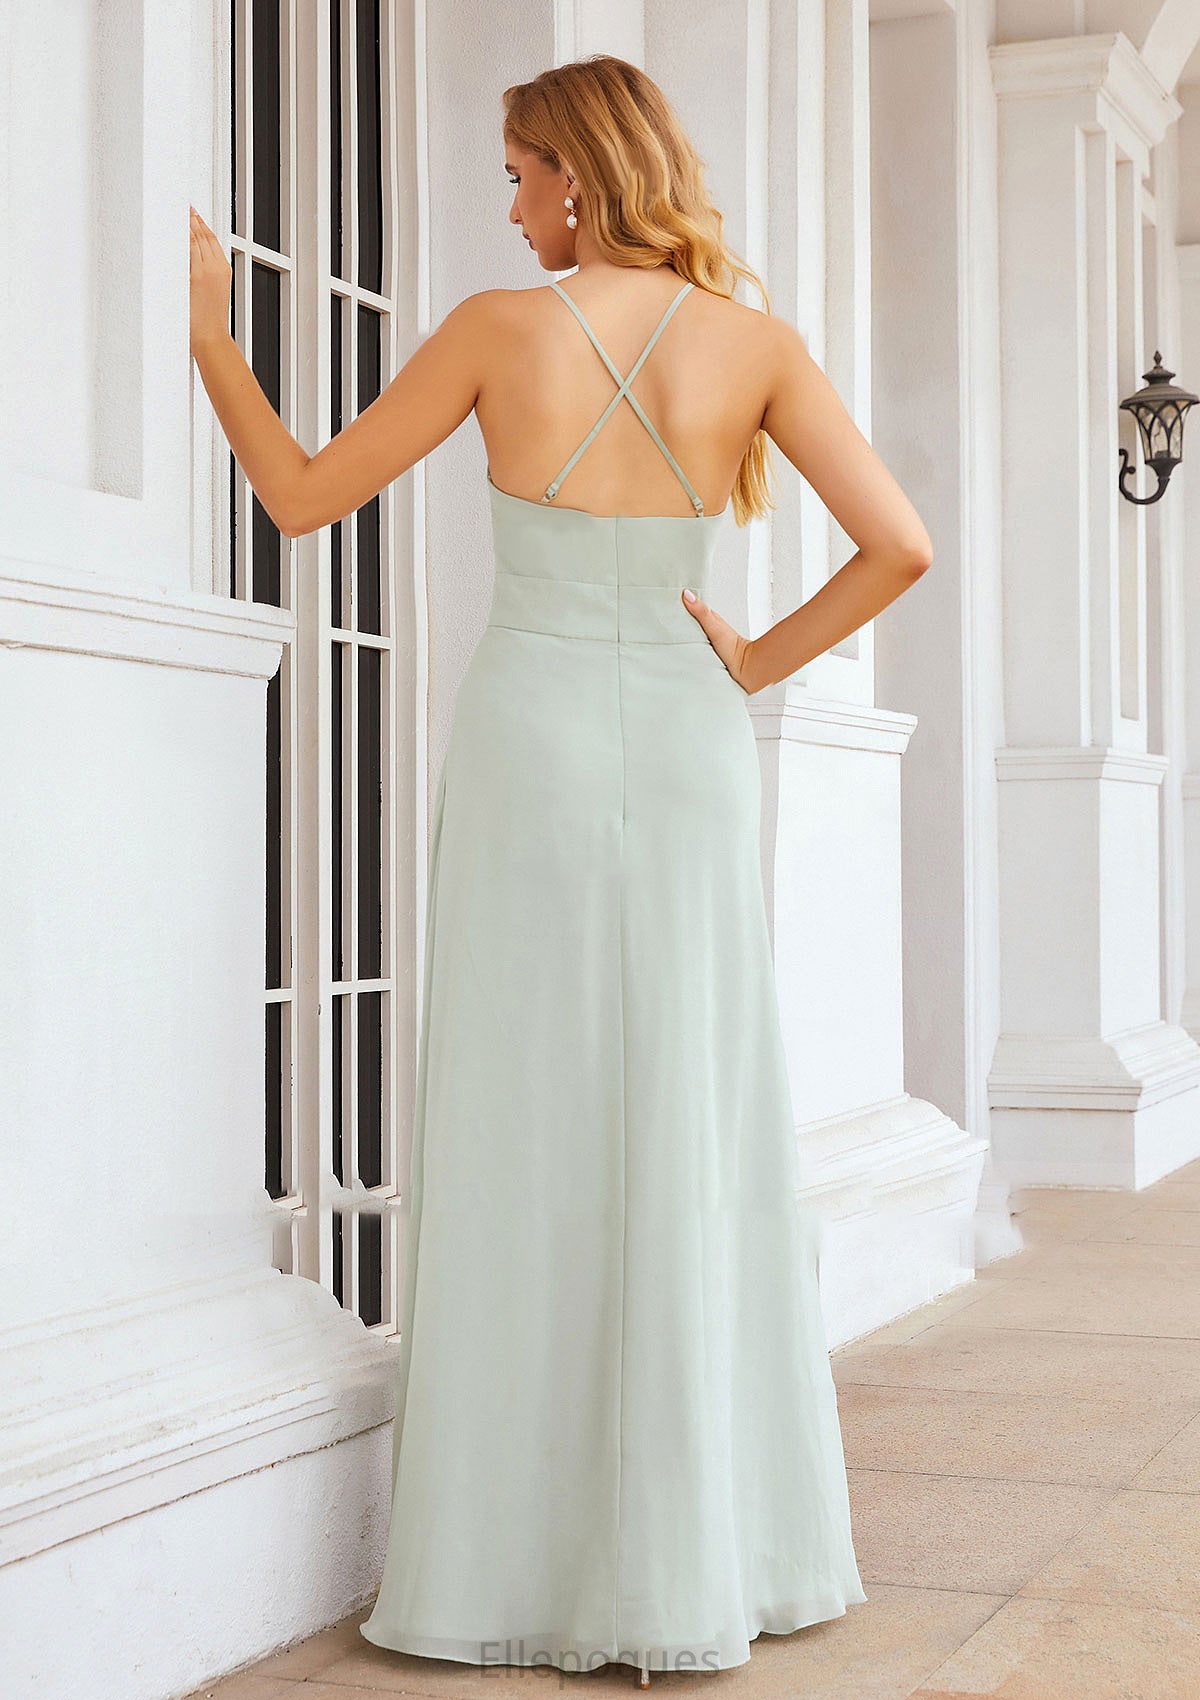 A-line Scoop Neck Sleeveless Long/Floor-Length Chiffon Bridesmaid Dresses With Pleated Pockets Carley HOP0025378